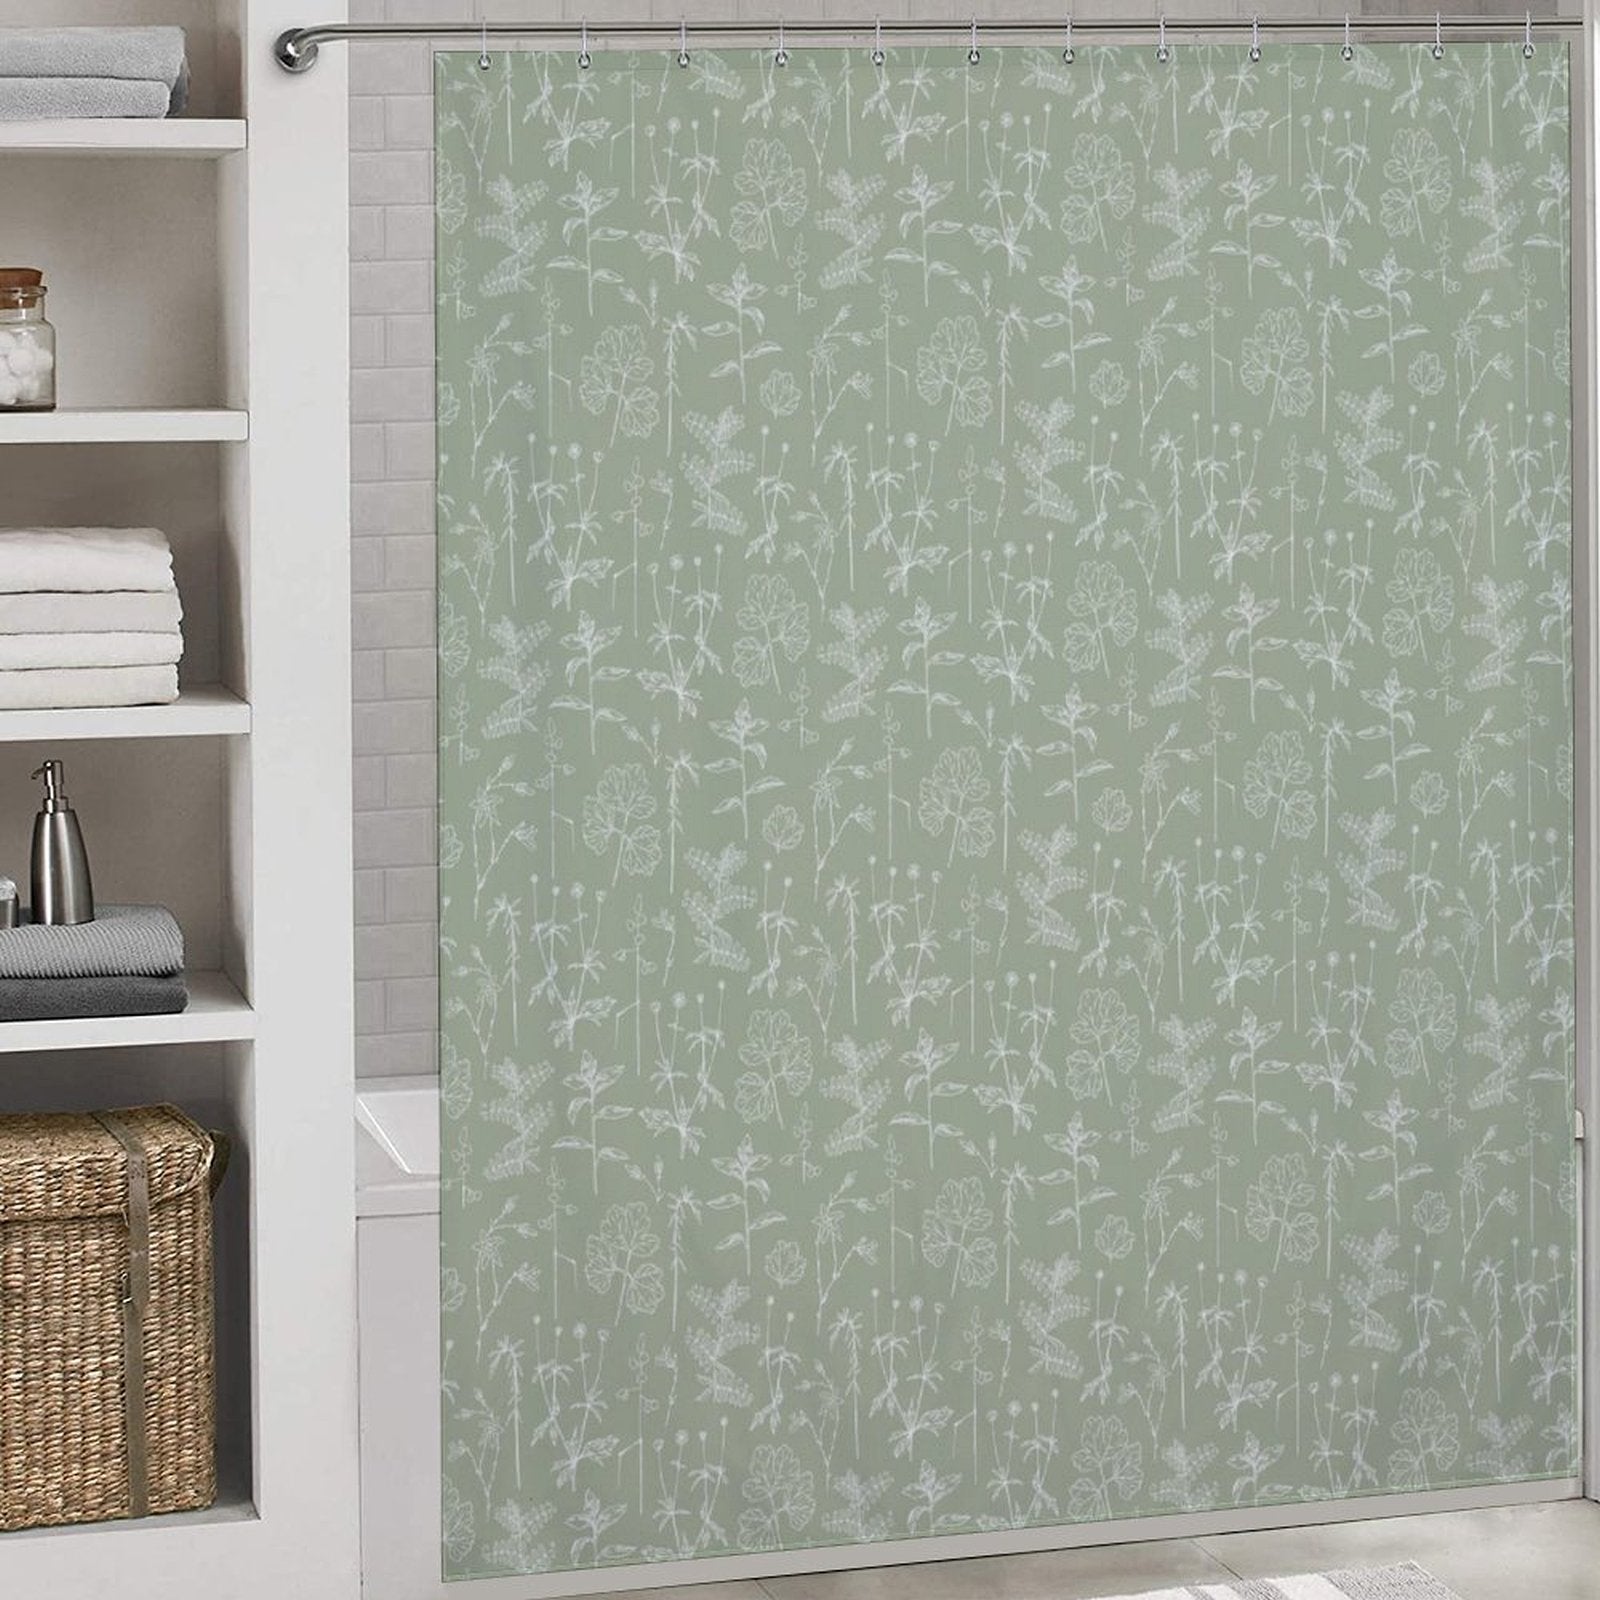 A bathroom with a Boho Retro Sage Green Herbs Flower Shower Curtain-Cottoncat by Cotton Cat, a white shelving unit holding folded towels, a basket, and various toiletries.